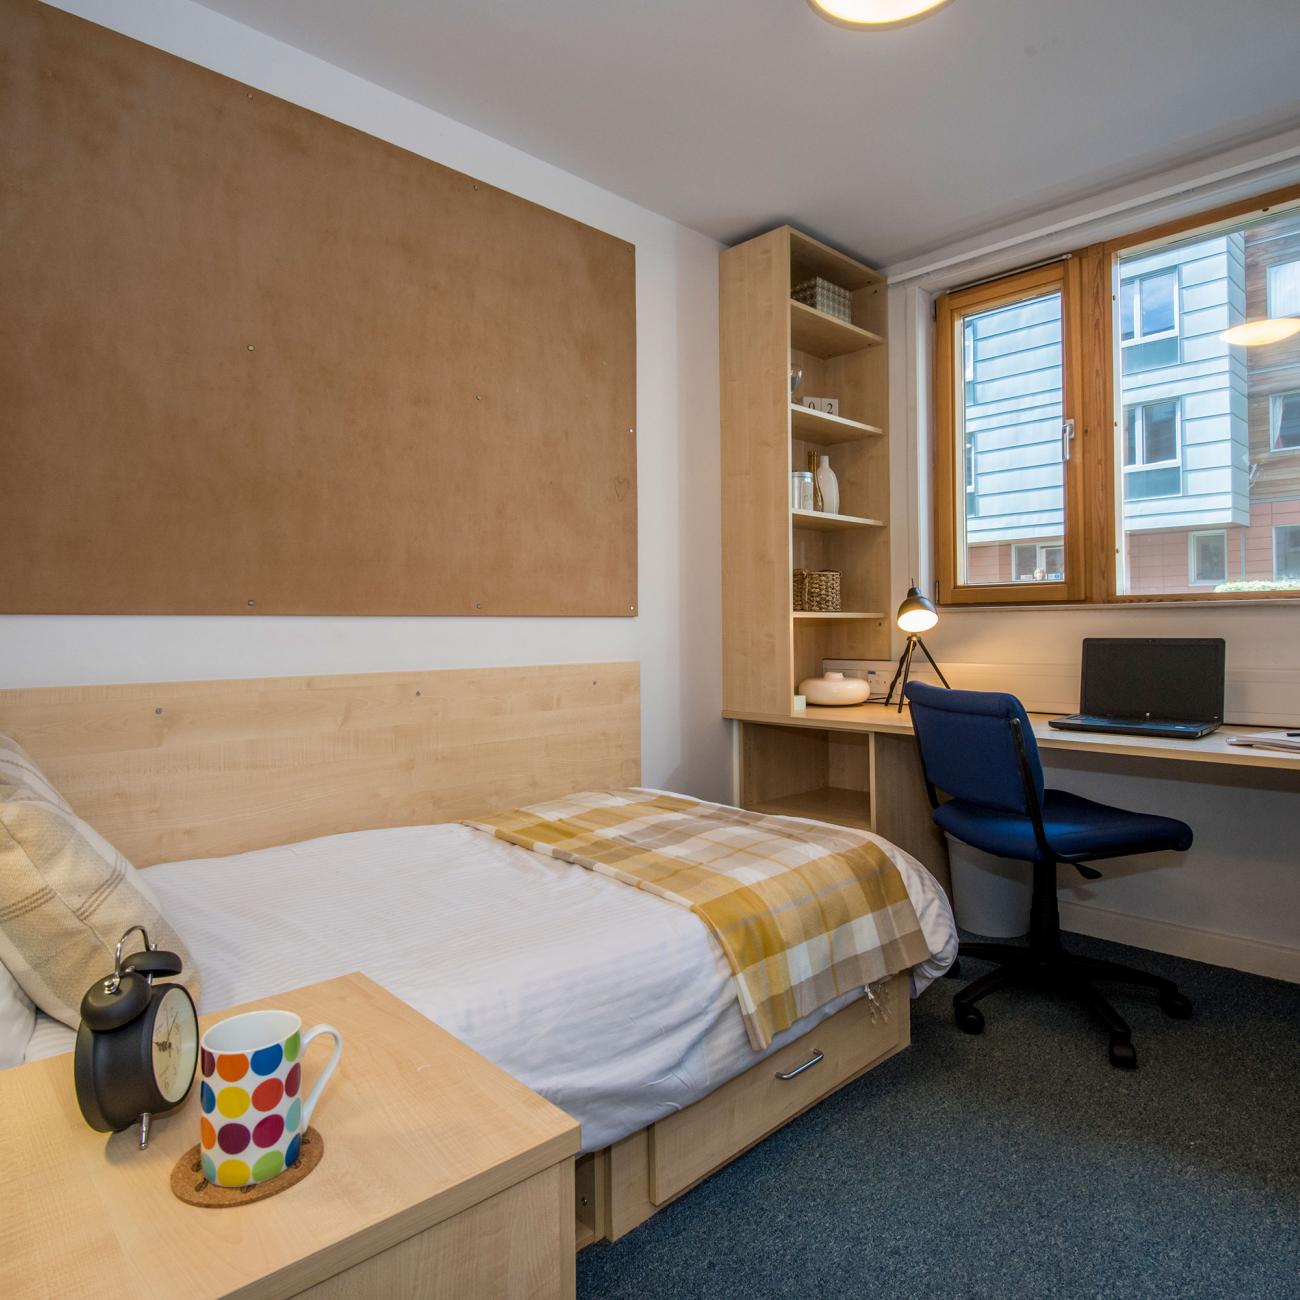 An empty student bedroom containing a neatly made single bed and a large desk with chair, beneath a window.